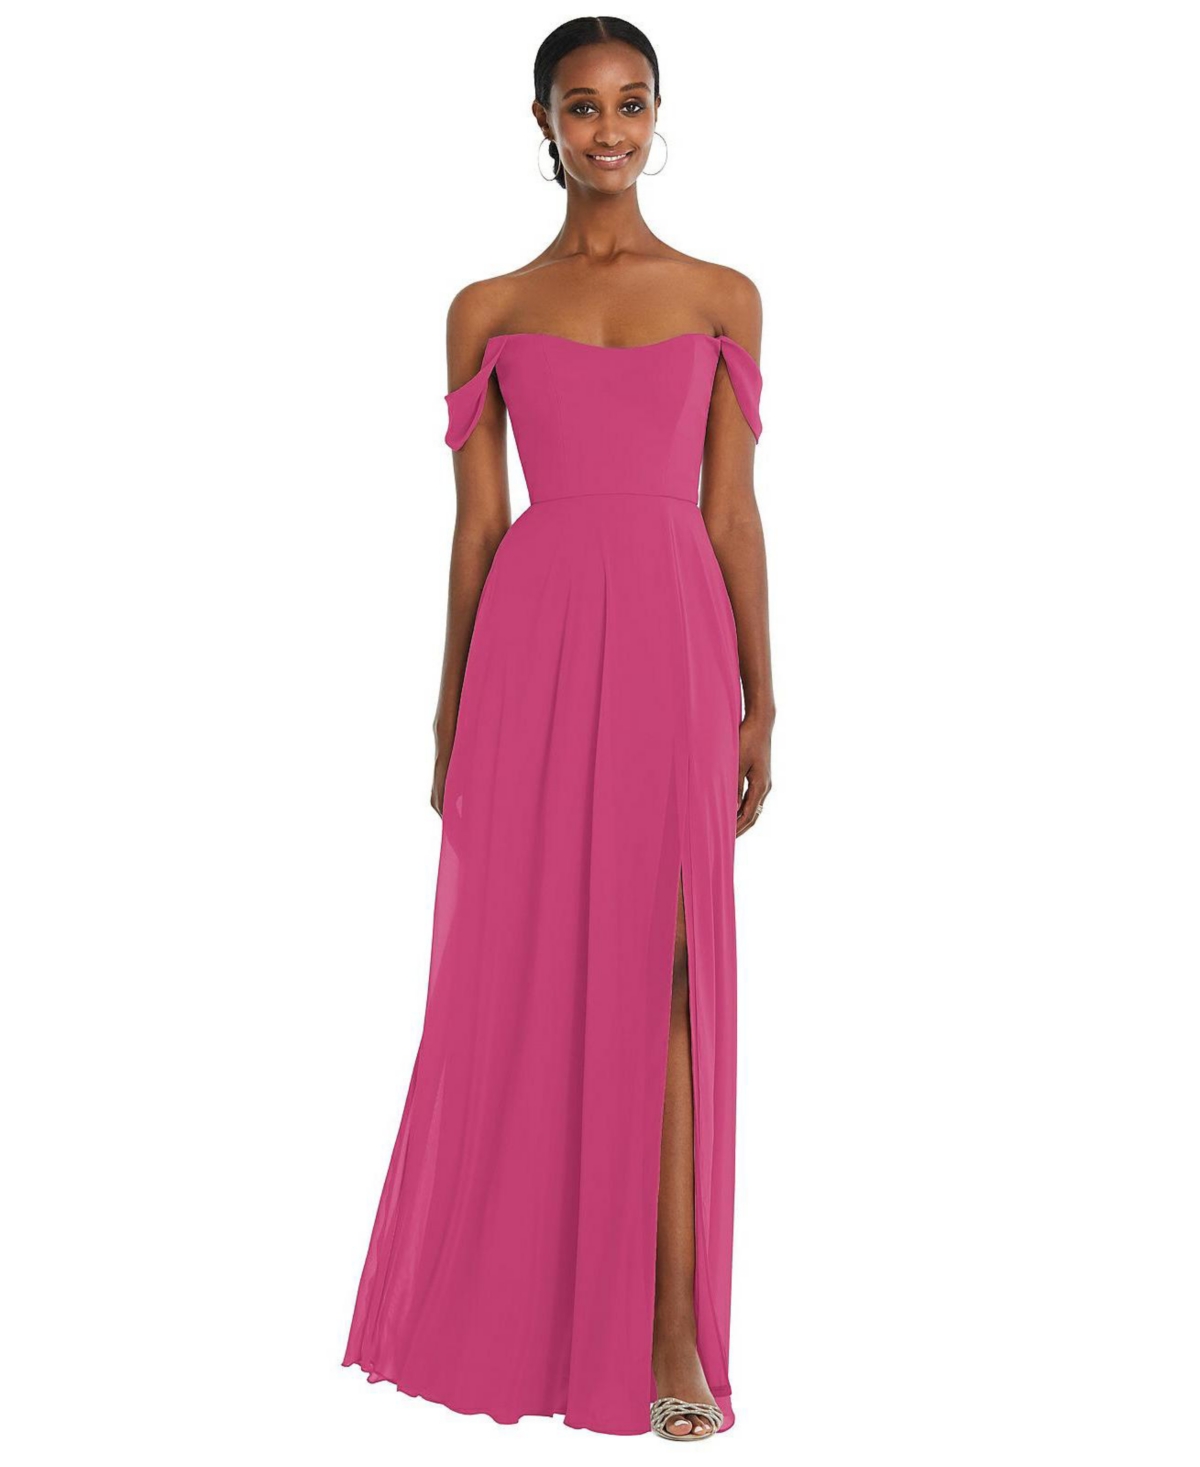 Off-the-Shoulder Basque Neck Maxi Dress with Flounce Sleeves - Tea rose